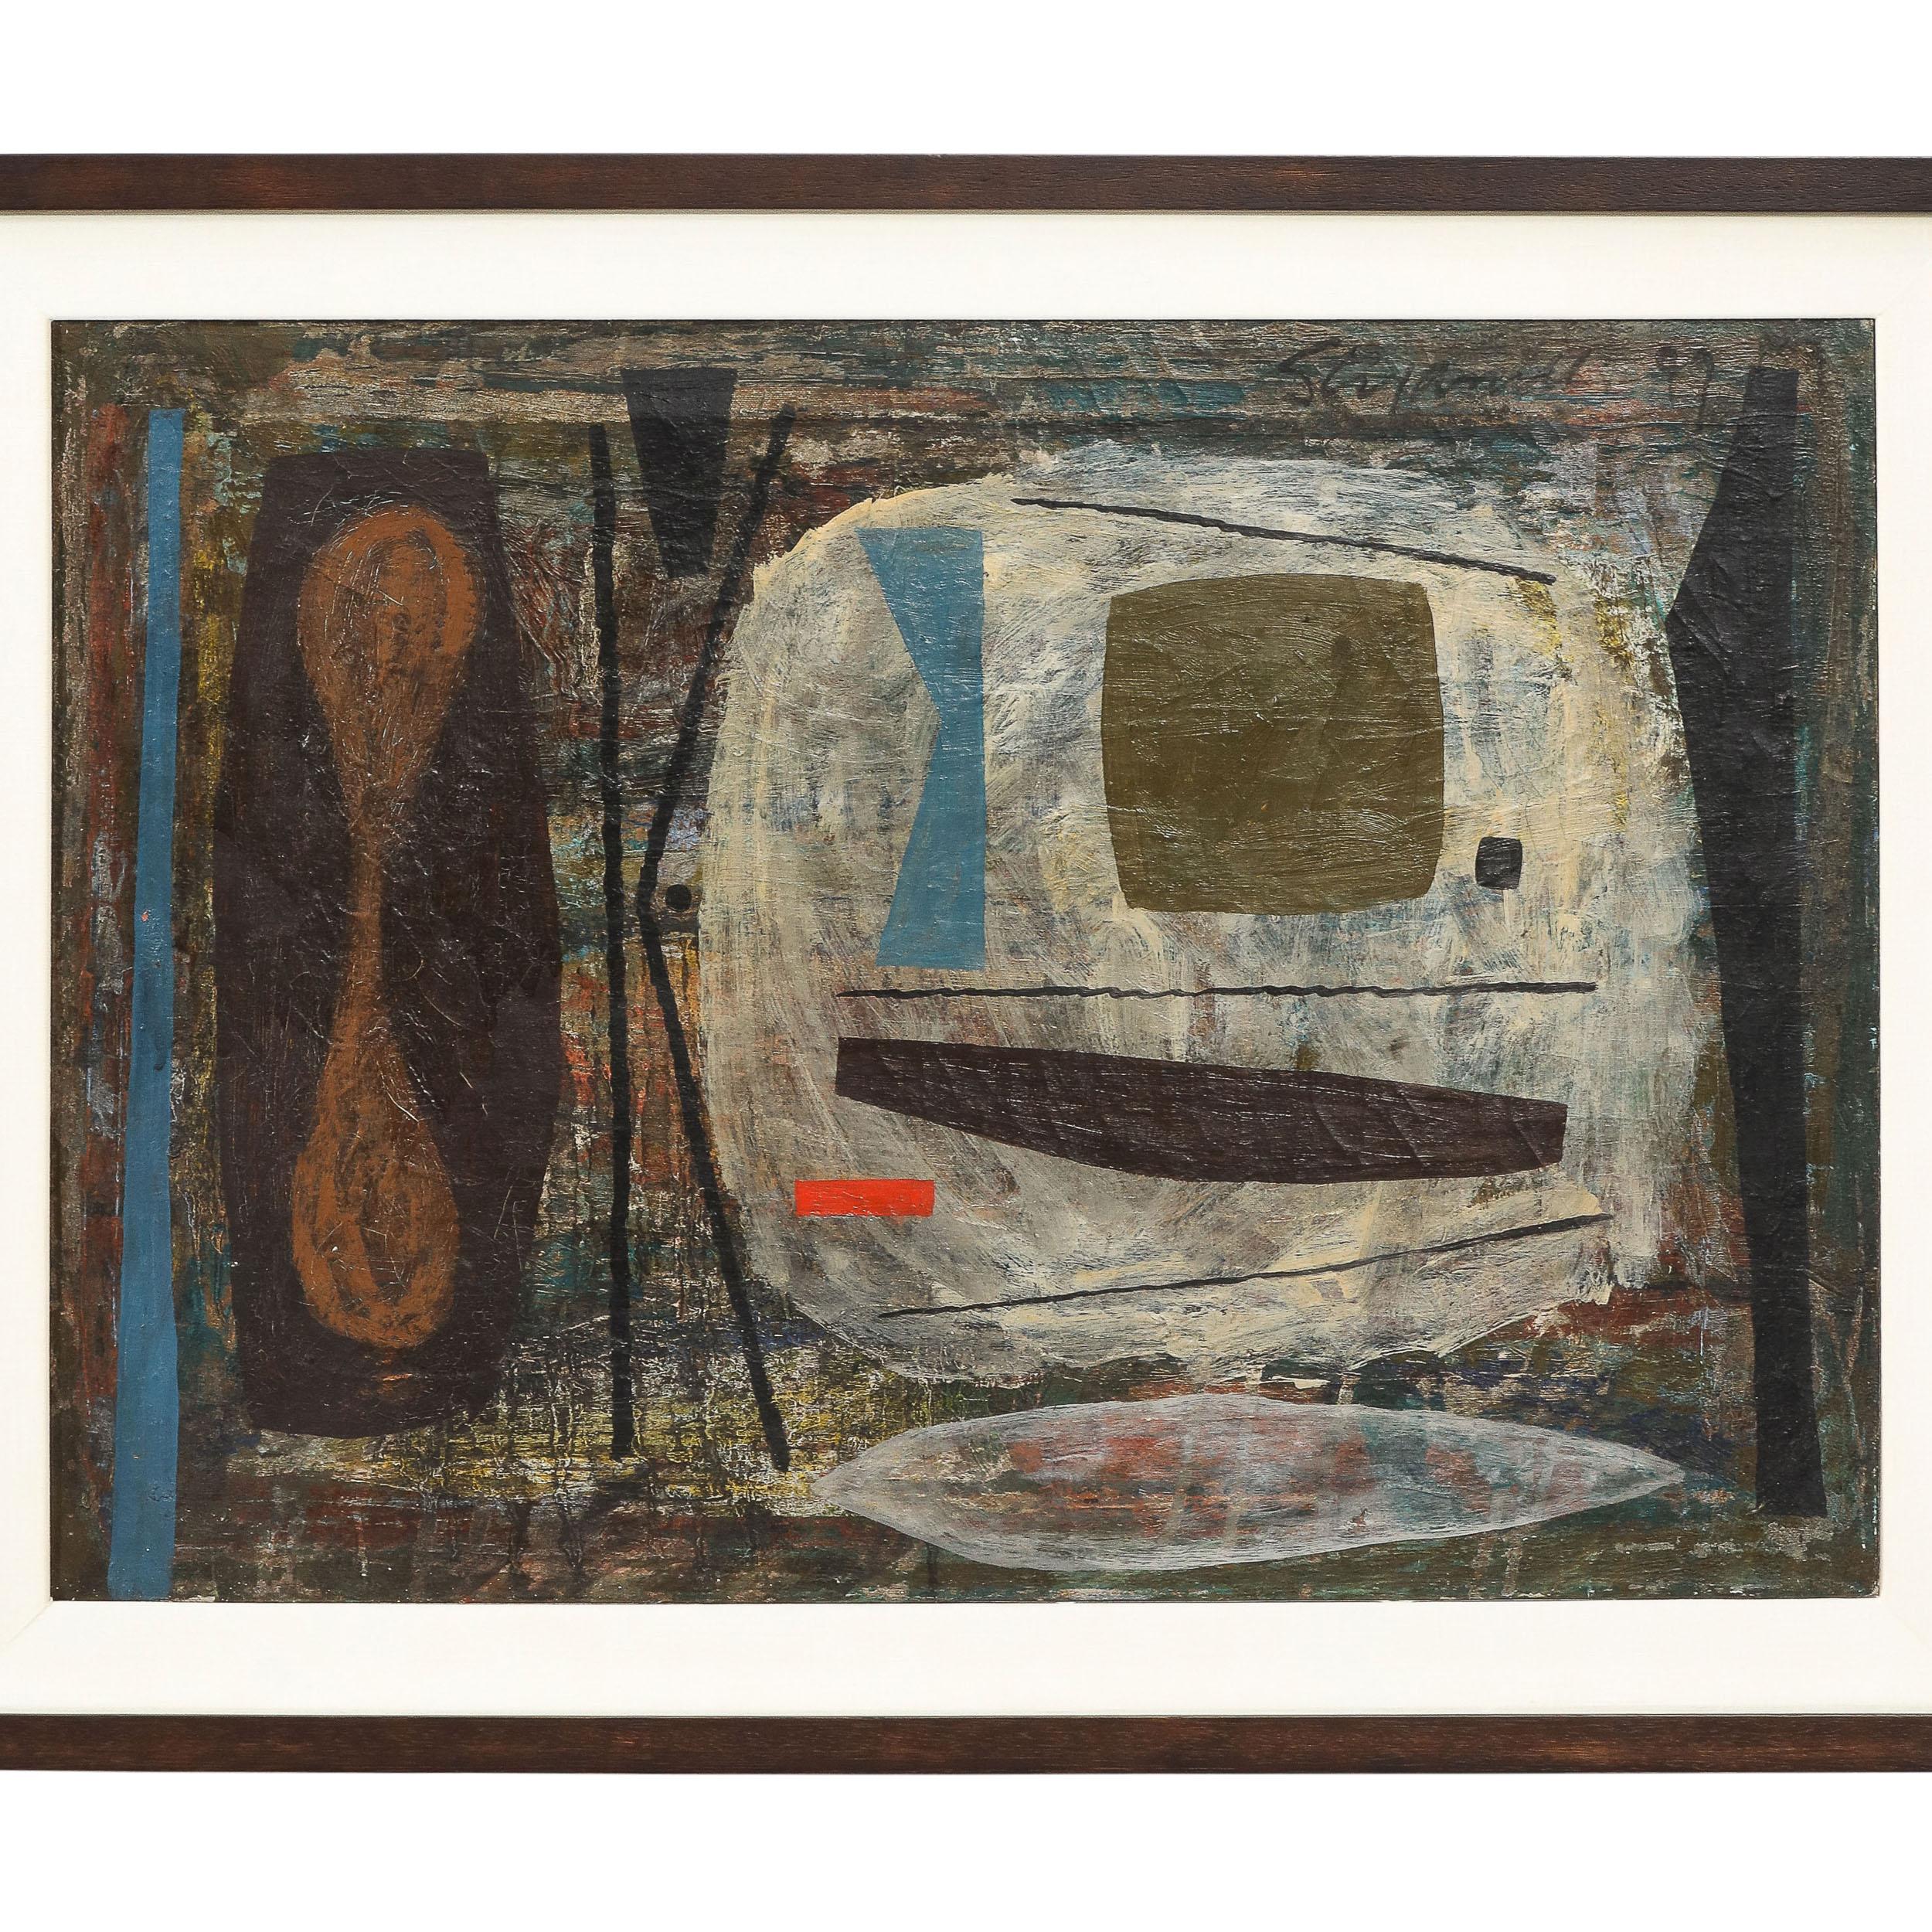 This Untitled Abstract Composition in Oil on Canvas signed Joe Stefanelli is a gem of Mid-Century American Abstraction. This painting brilliantly exemplifies the approach and movement of the New York School of Abstract Expressionists which